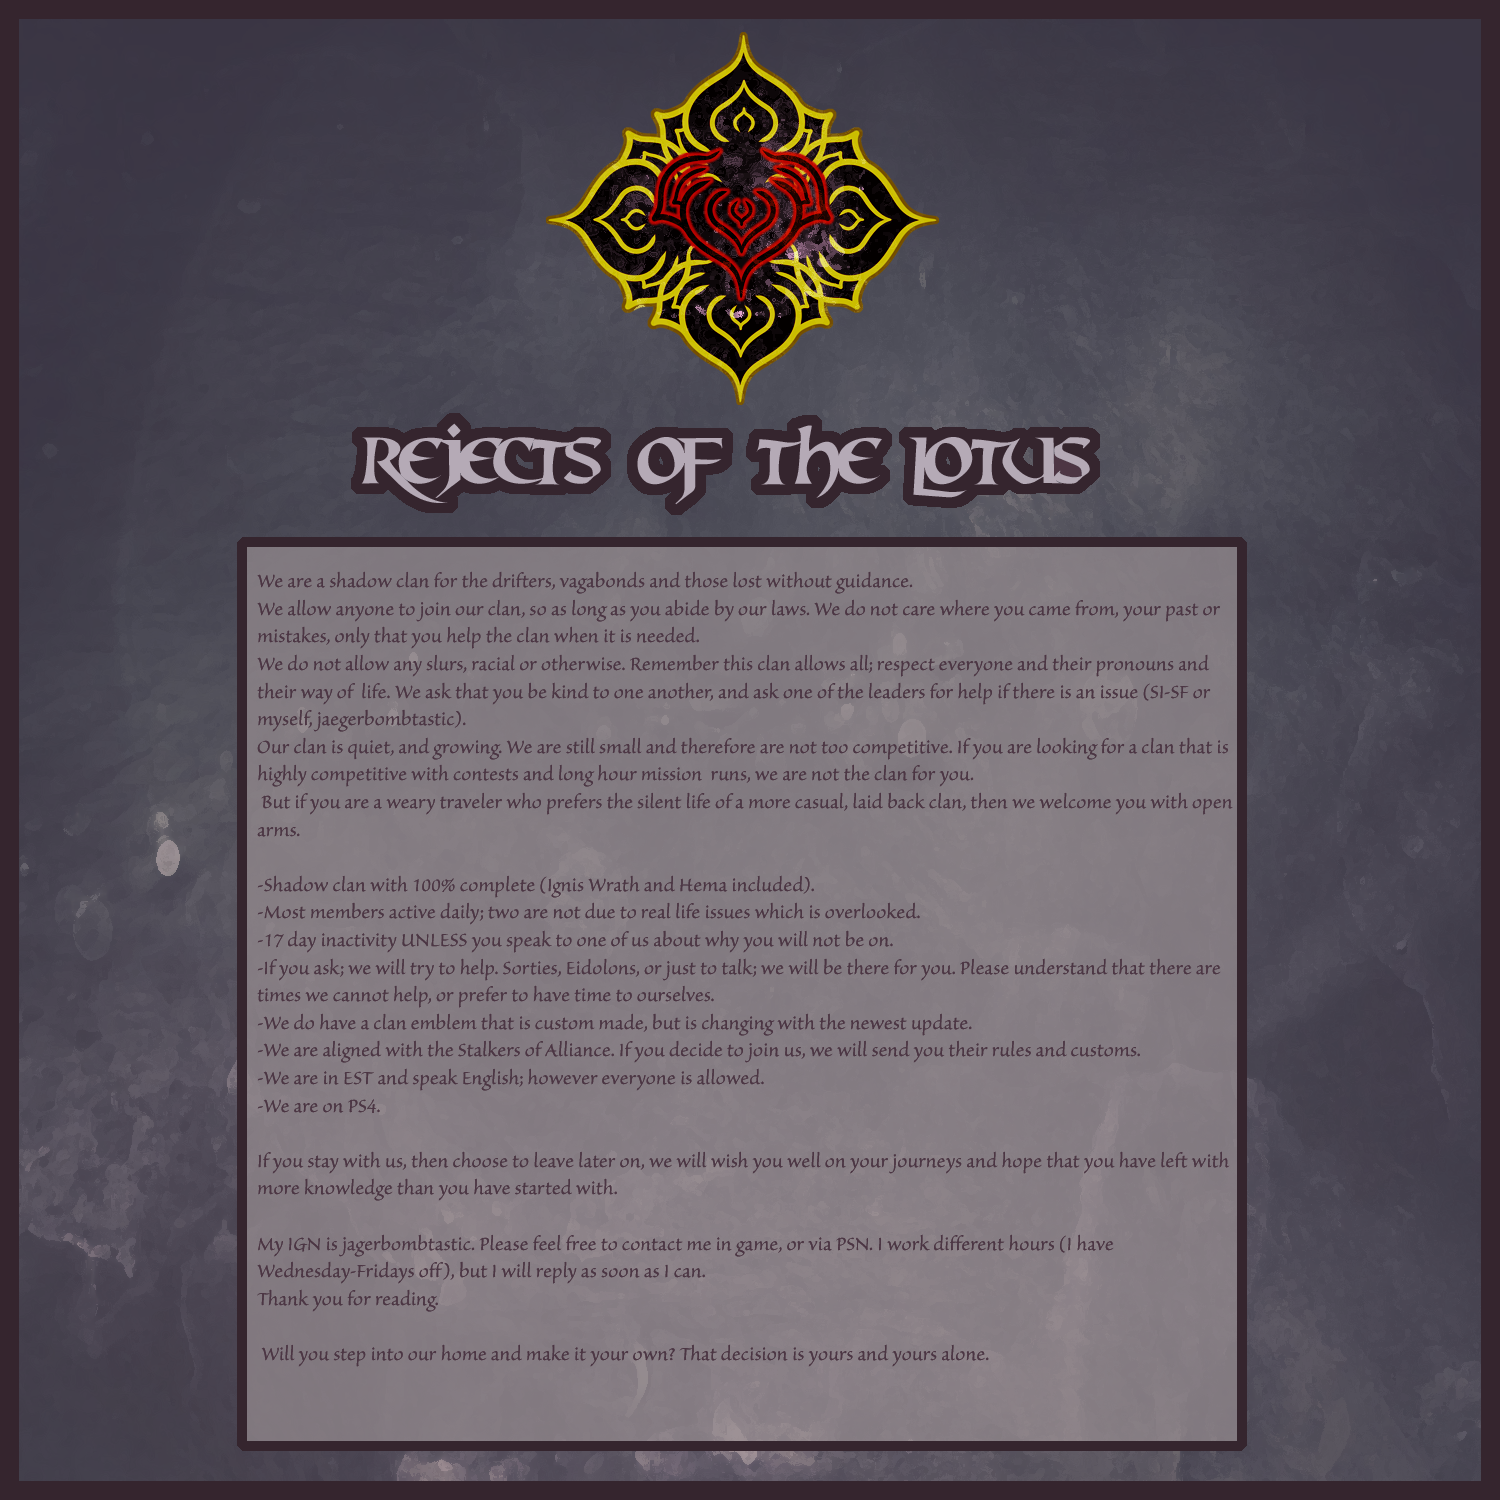 rotl2_by_soundlessinsanity-dclv5n4.png